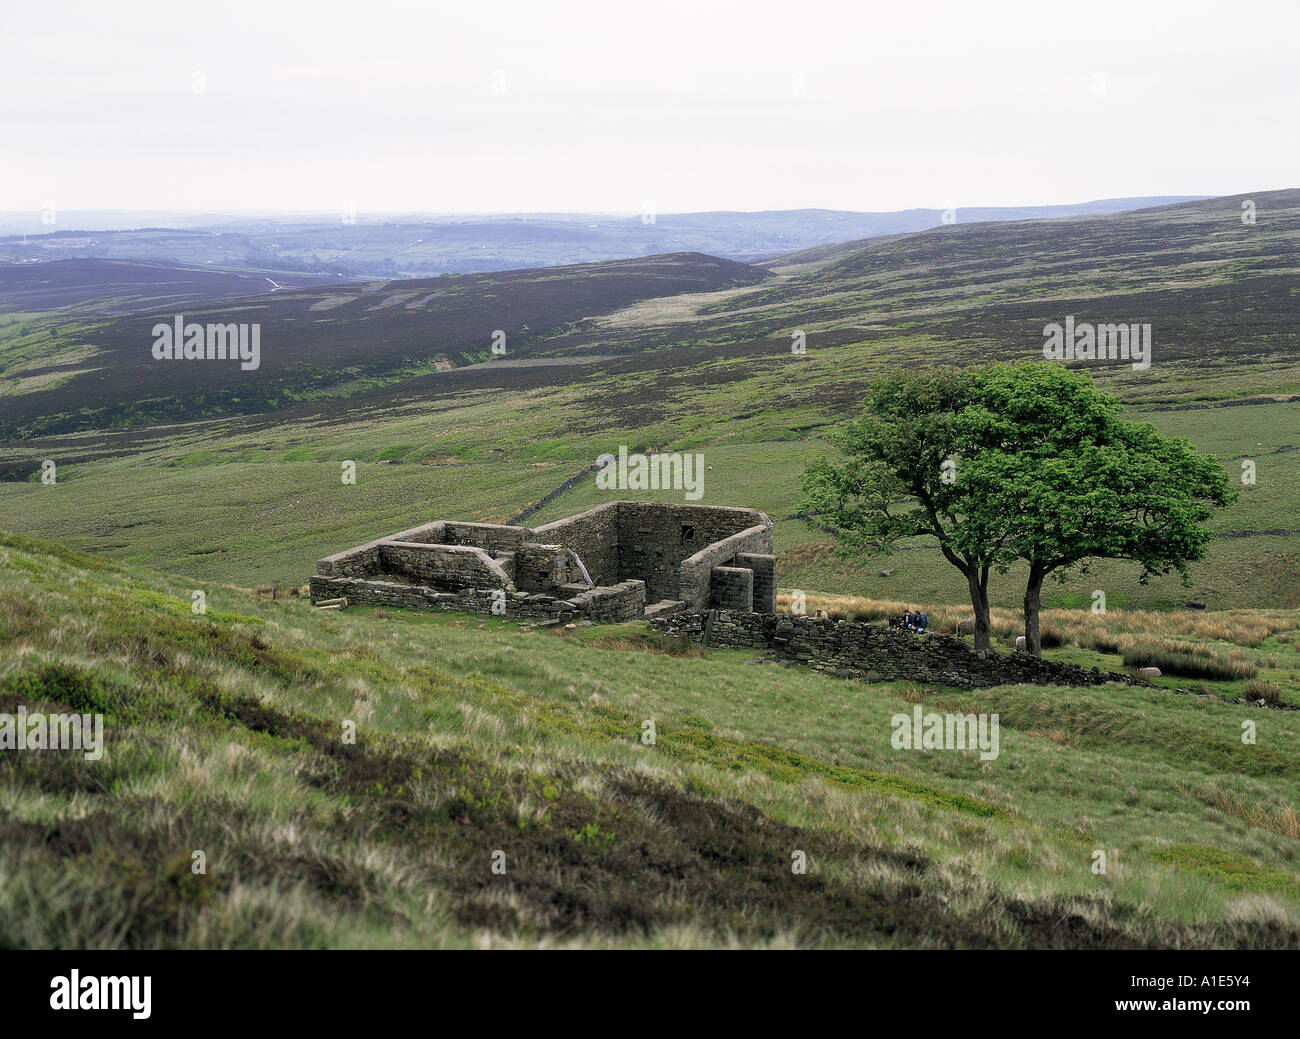 Lage von Charlotte Bronte Wuthering Heights Roman in Yorkshire Dales England Stockfoto